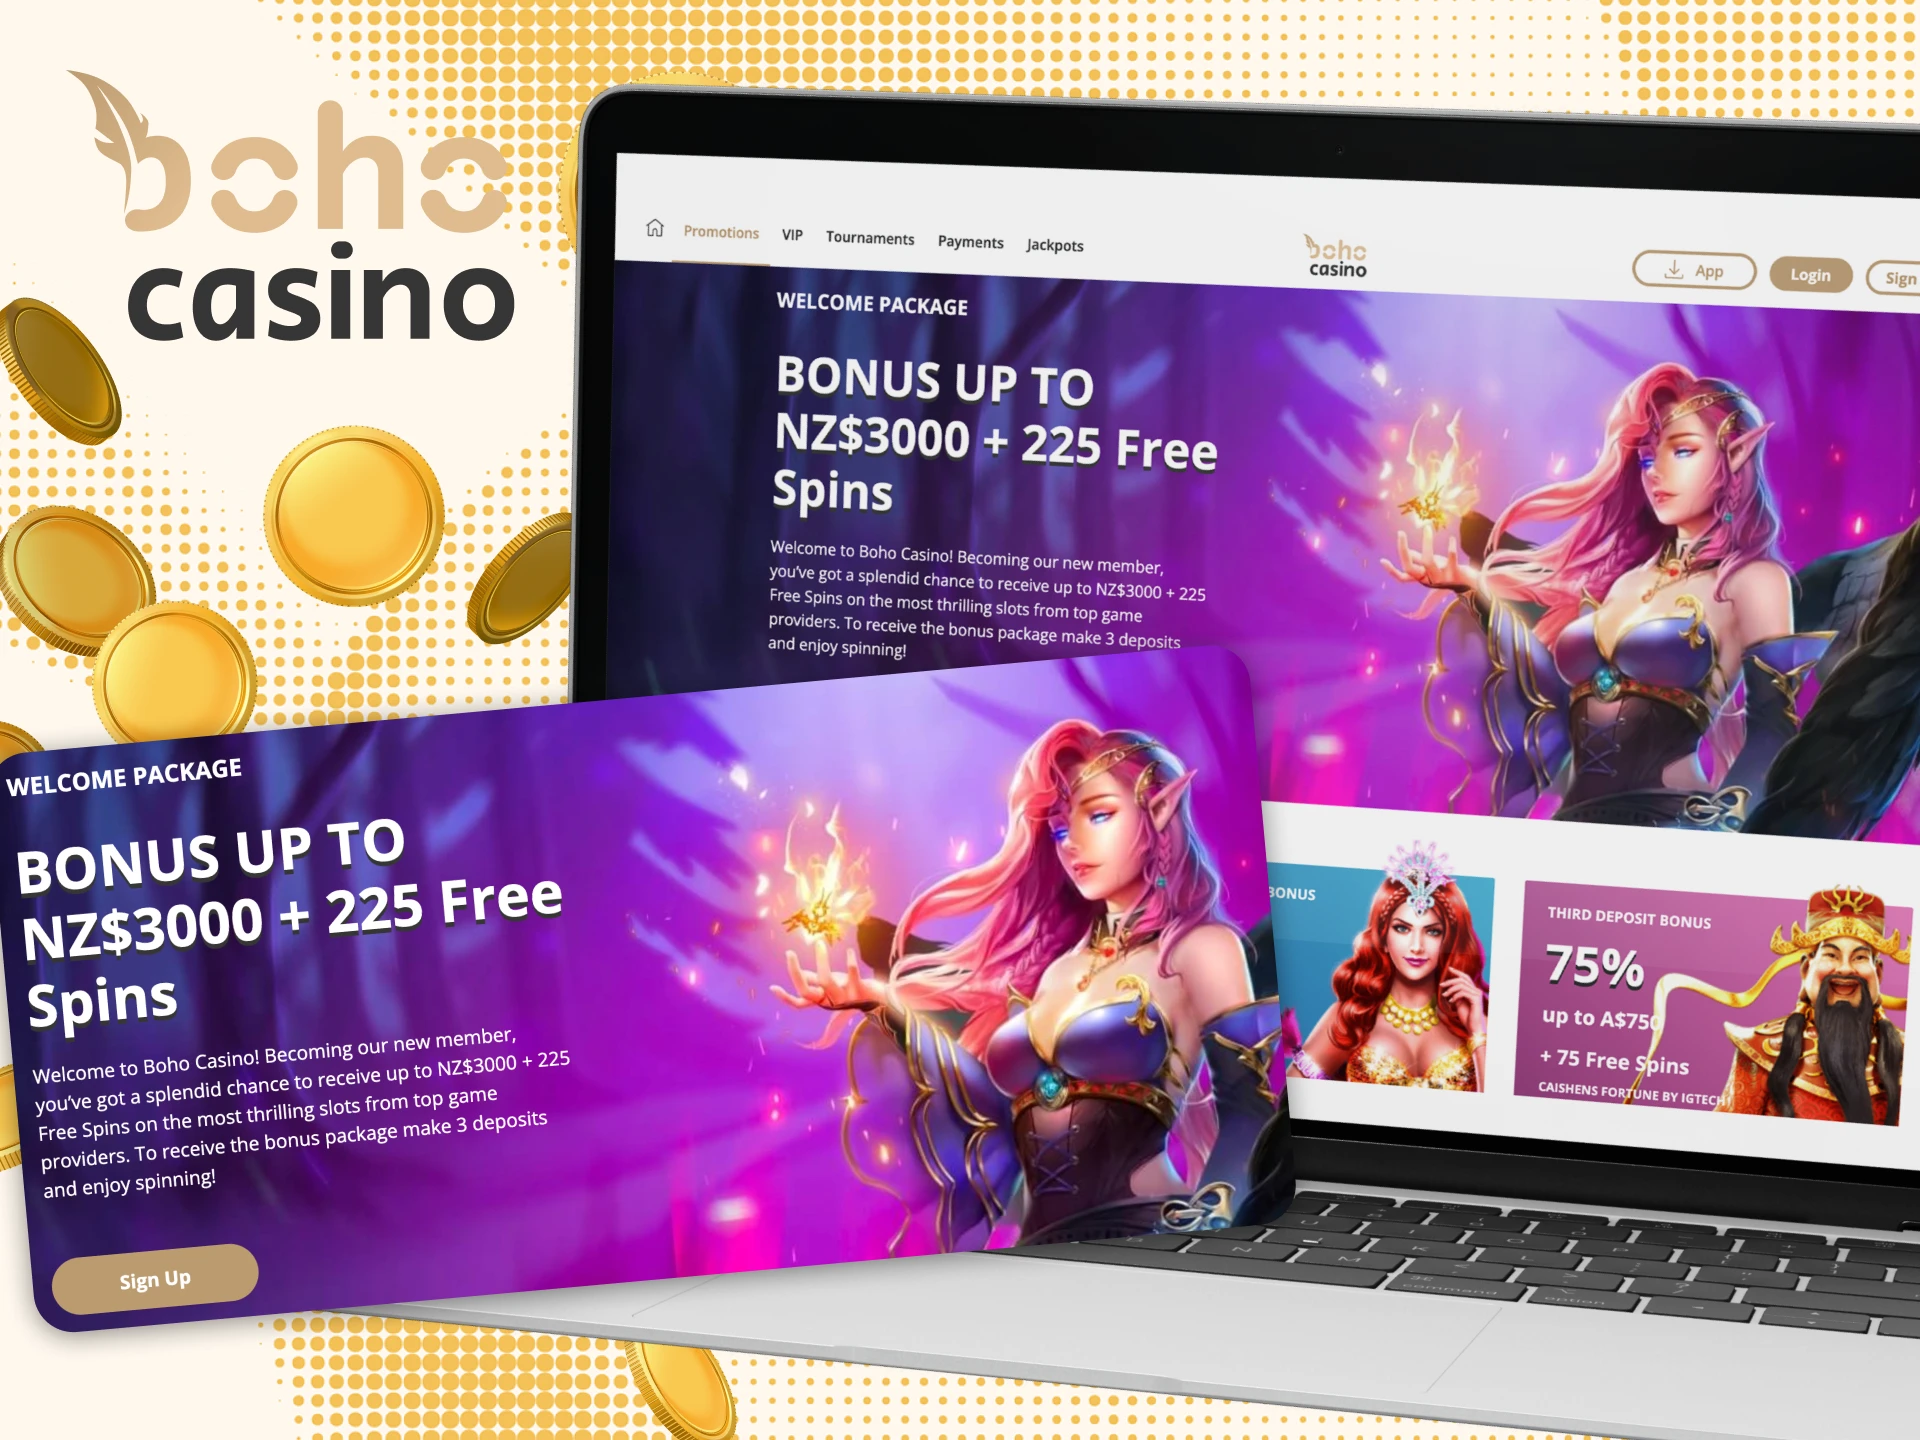 Make a first deposit and get Boho Casino +225% sign up bonus of up to 3,000 NZD and 225 free spins.